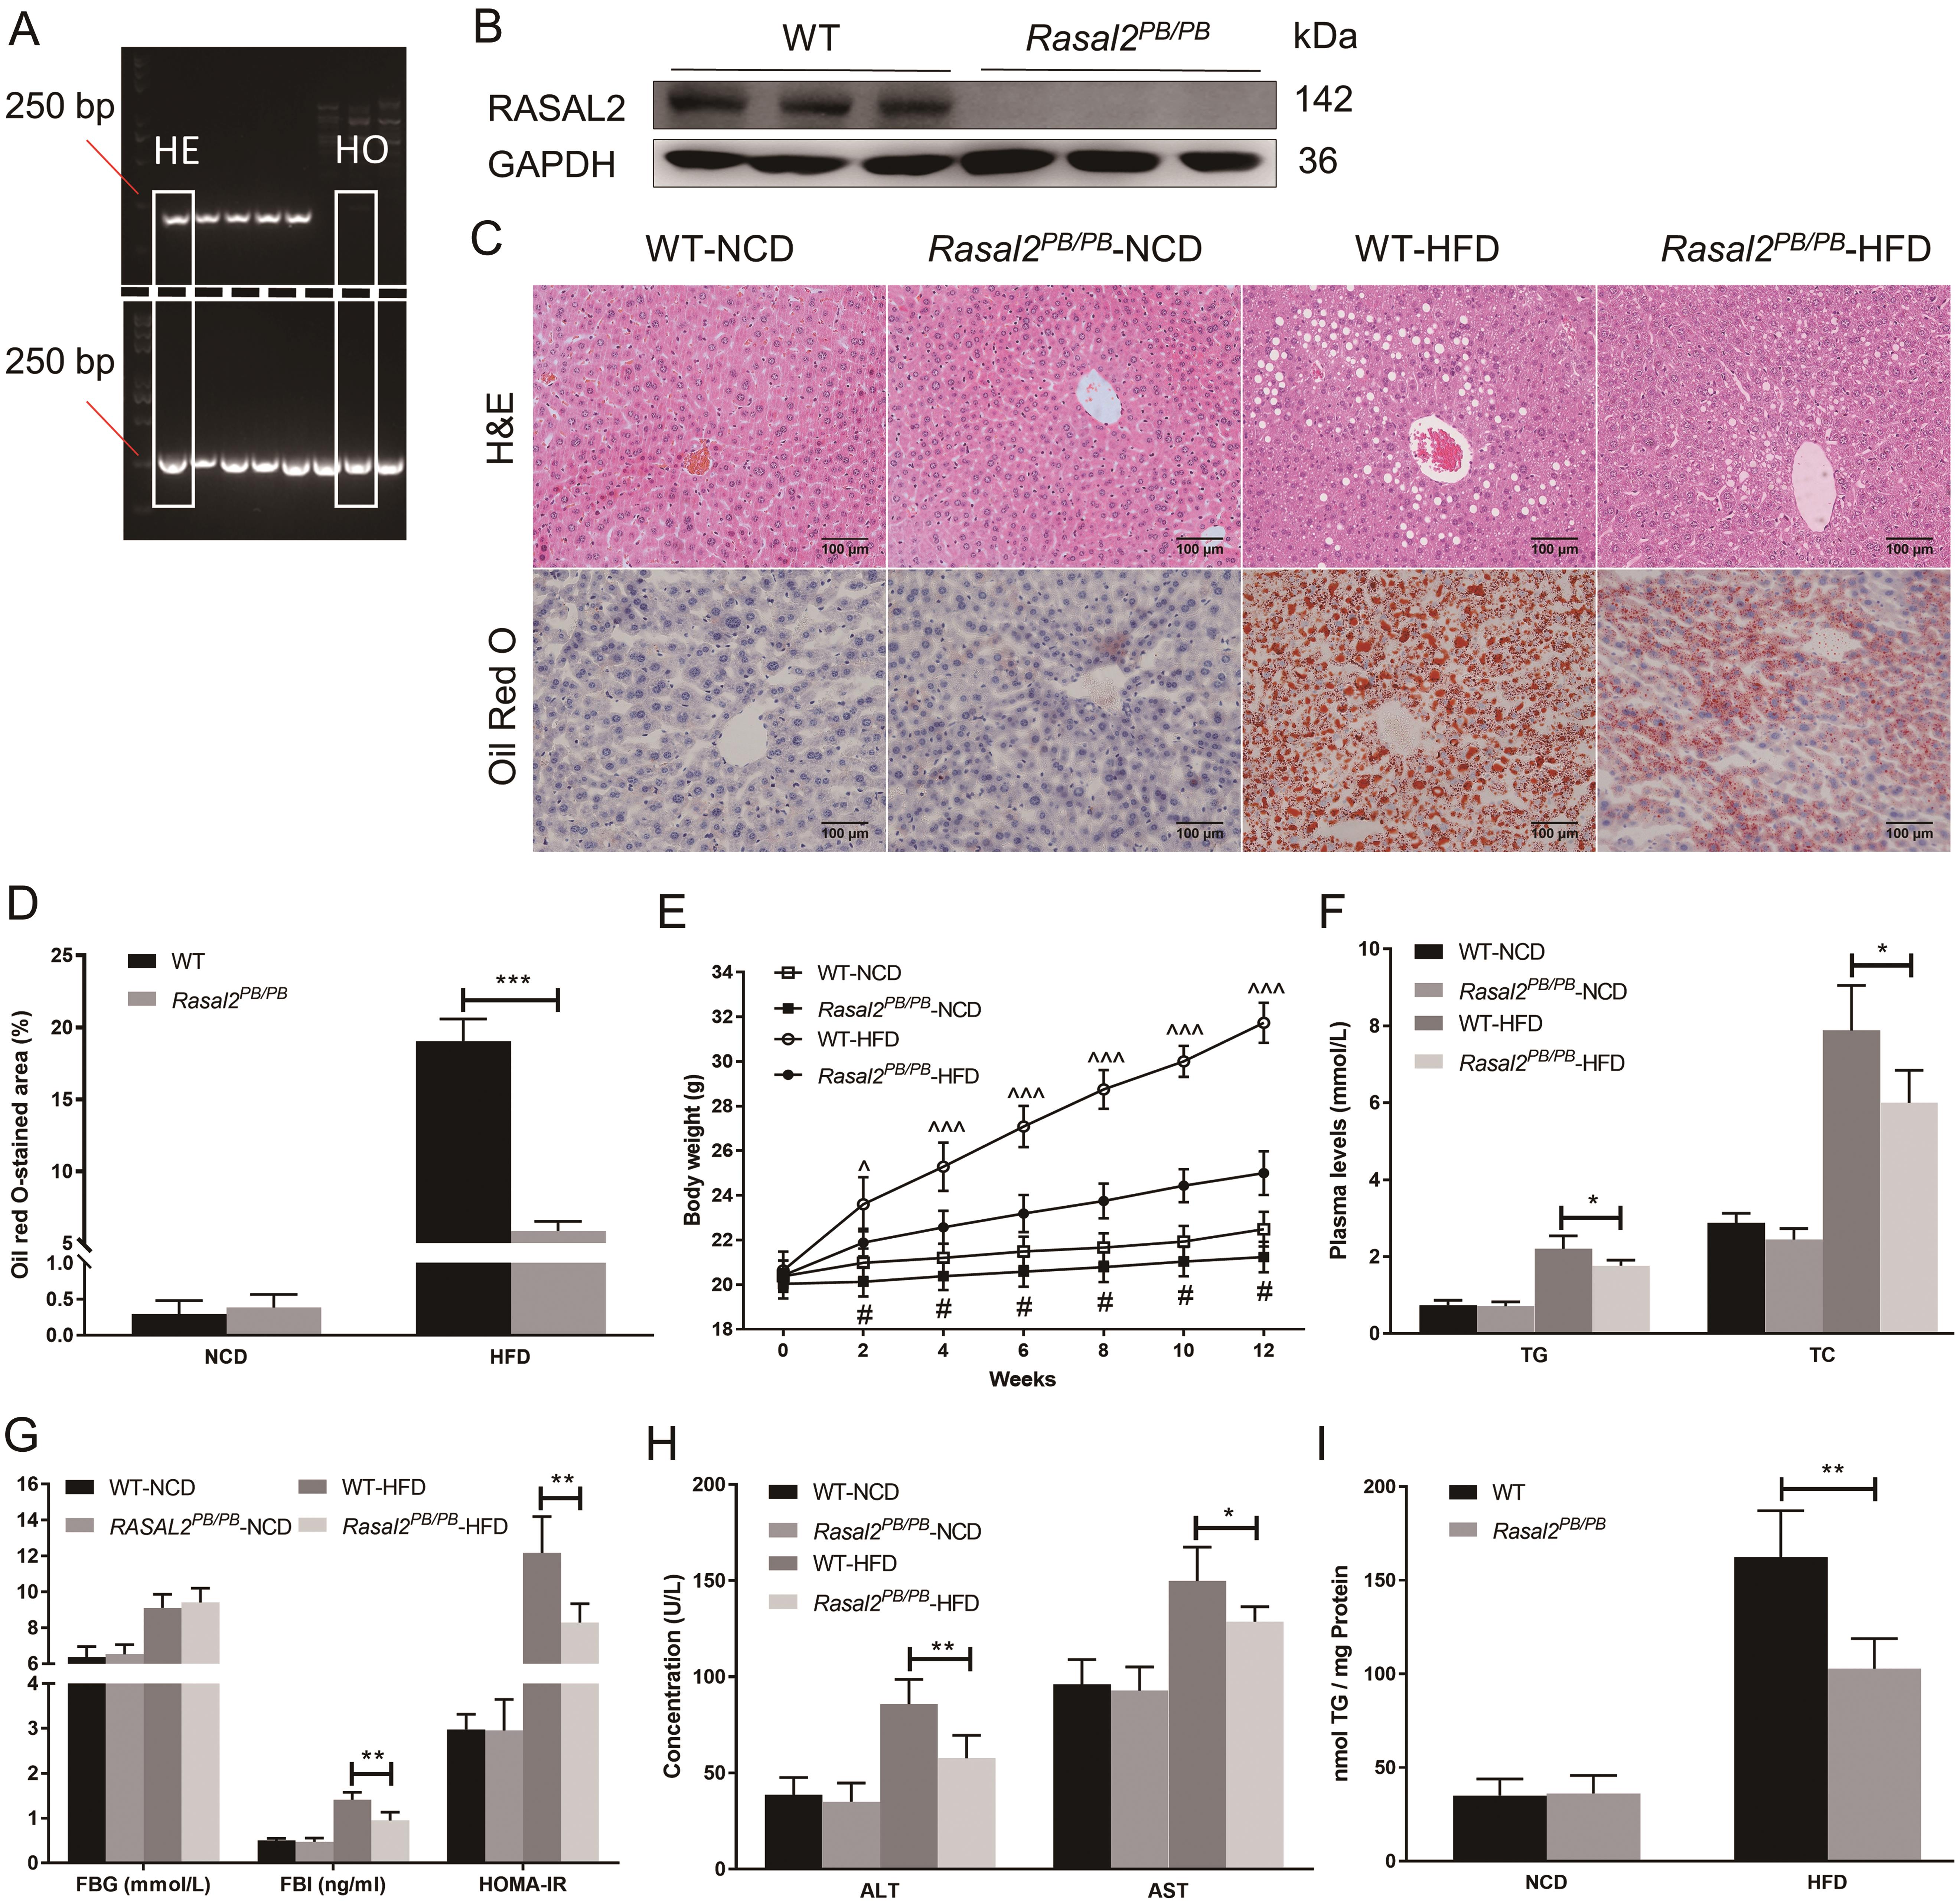 RAS protein activator like 2 (RASAL2) deficiency protects against hepatic steatosis and metabolic disorders in high-fat diet (HFD)-fed mice.